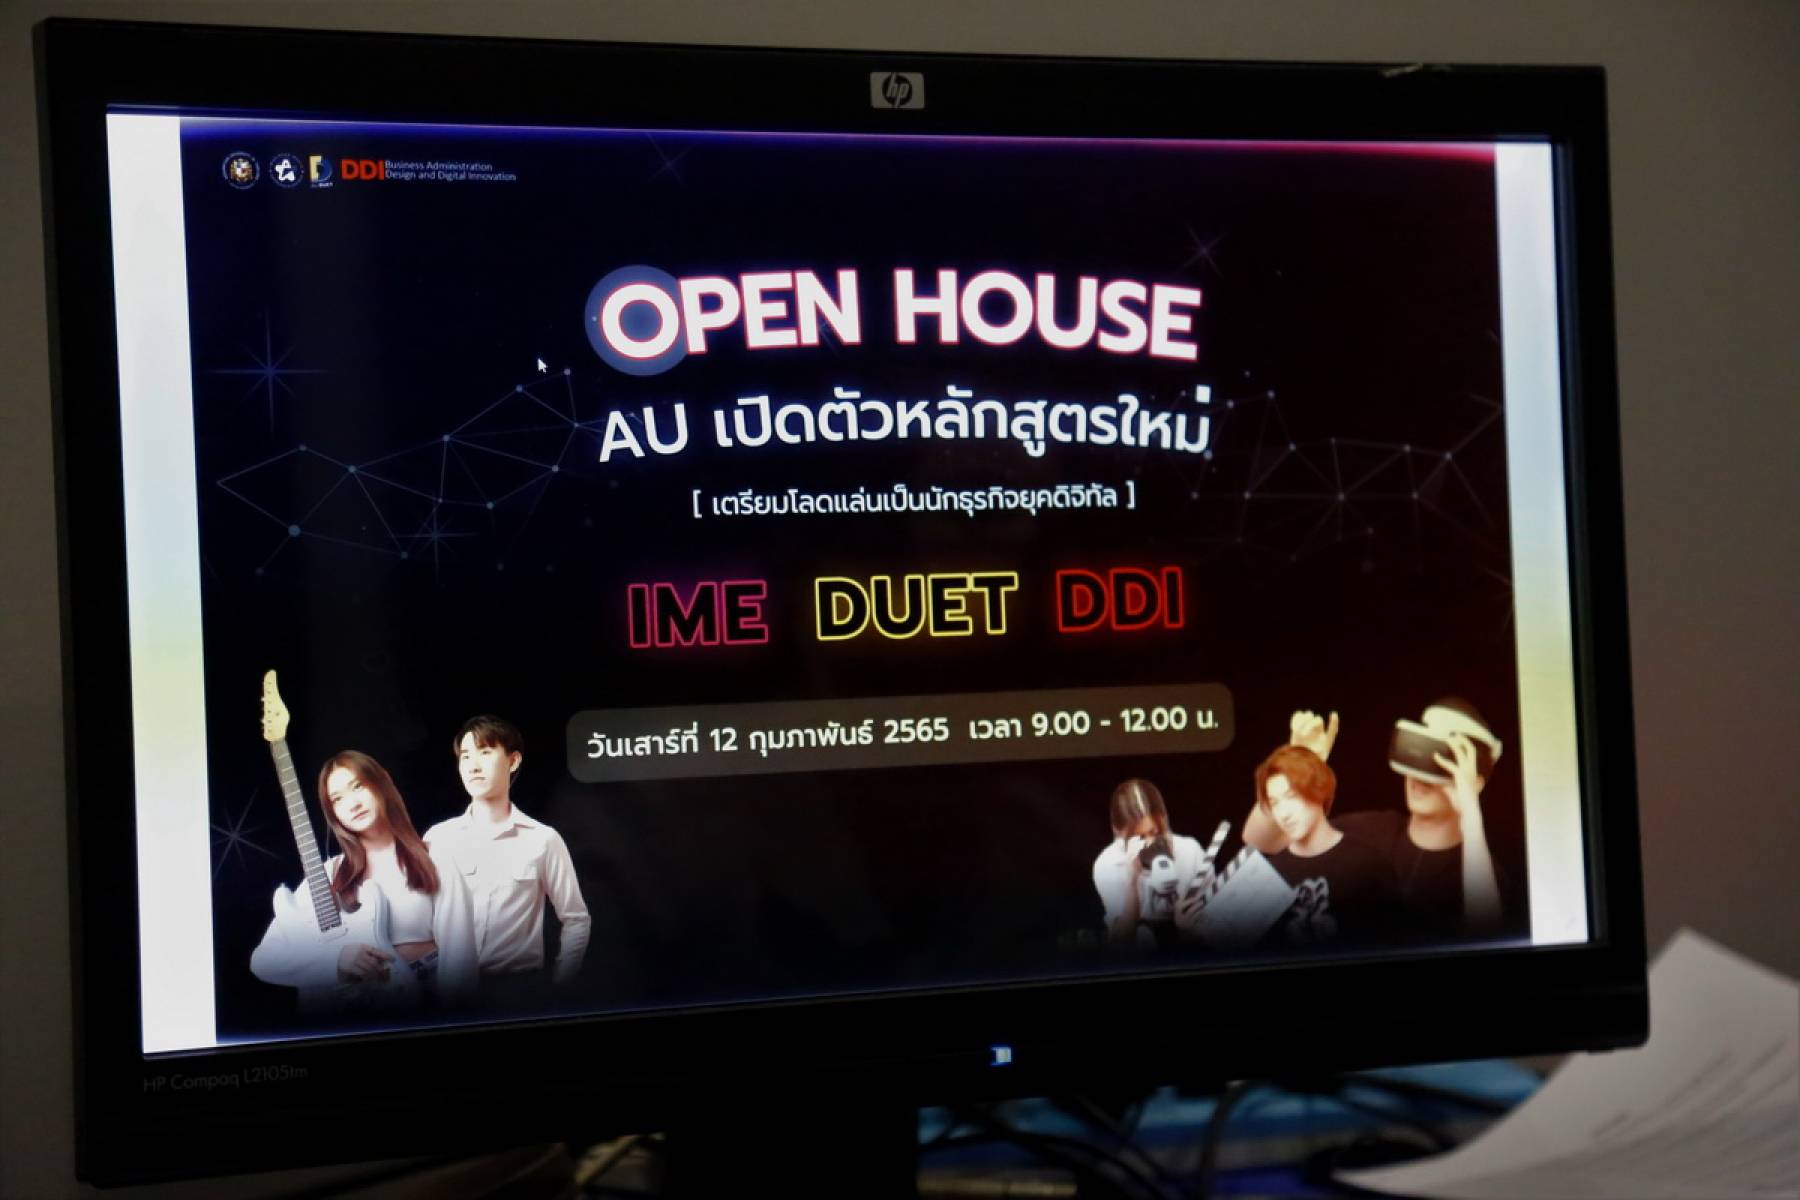 AU Open House: 3 New Programs (IME, DUET, and DDI)